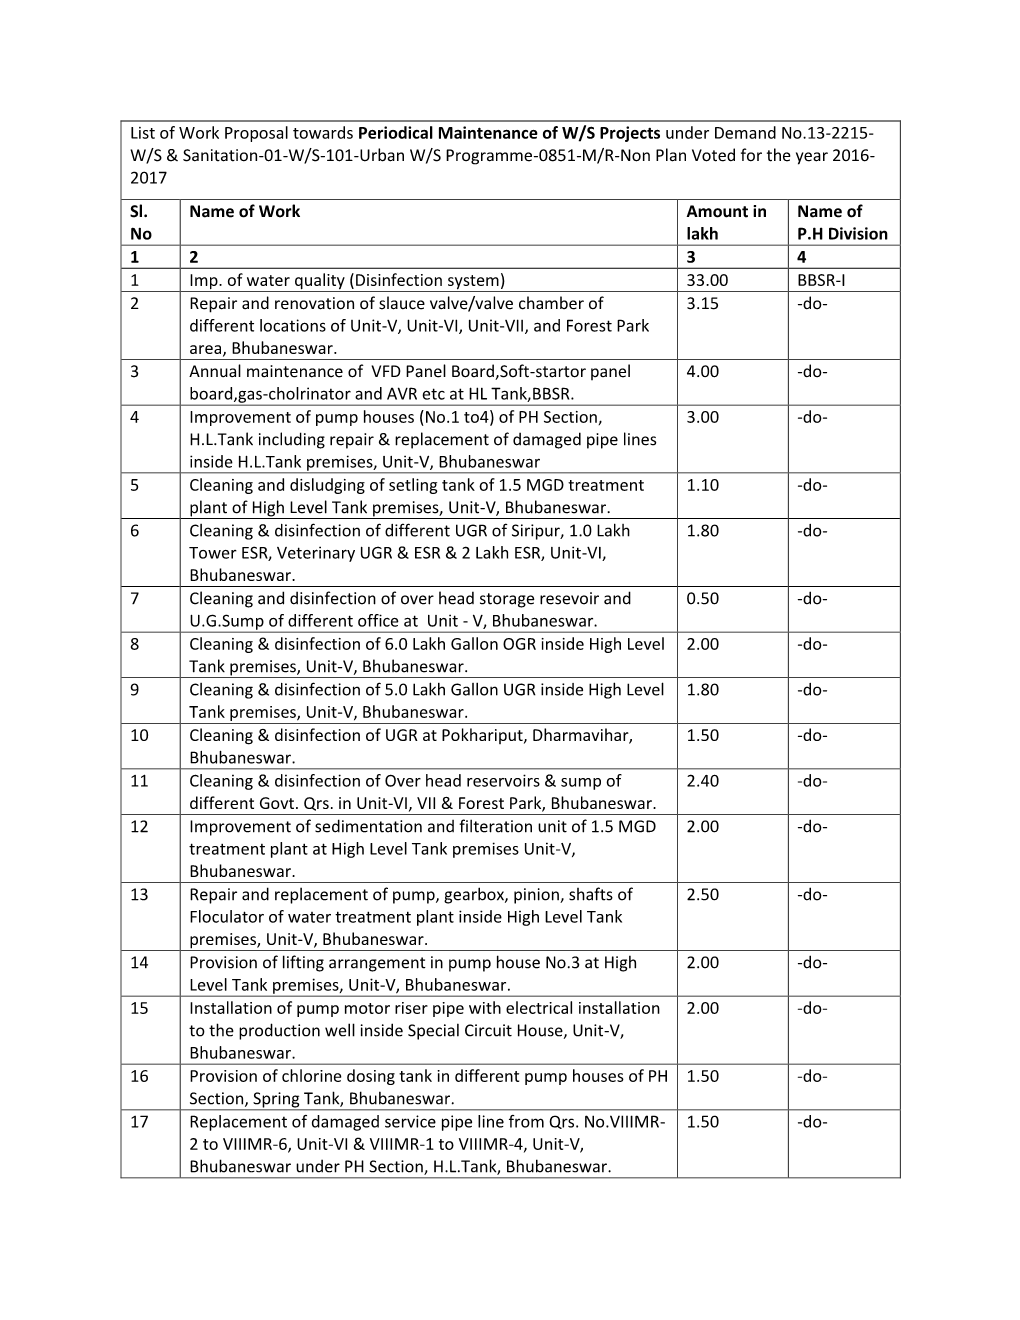 List of Work Proposal Towards Periodical Maintenance of W/S